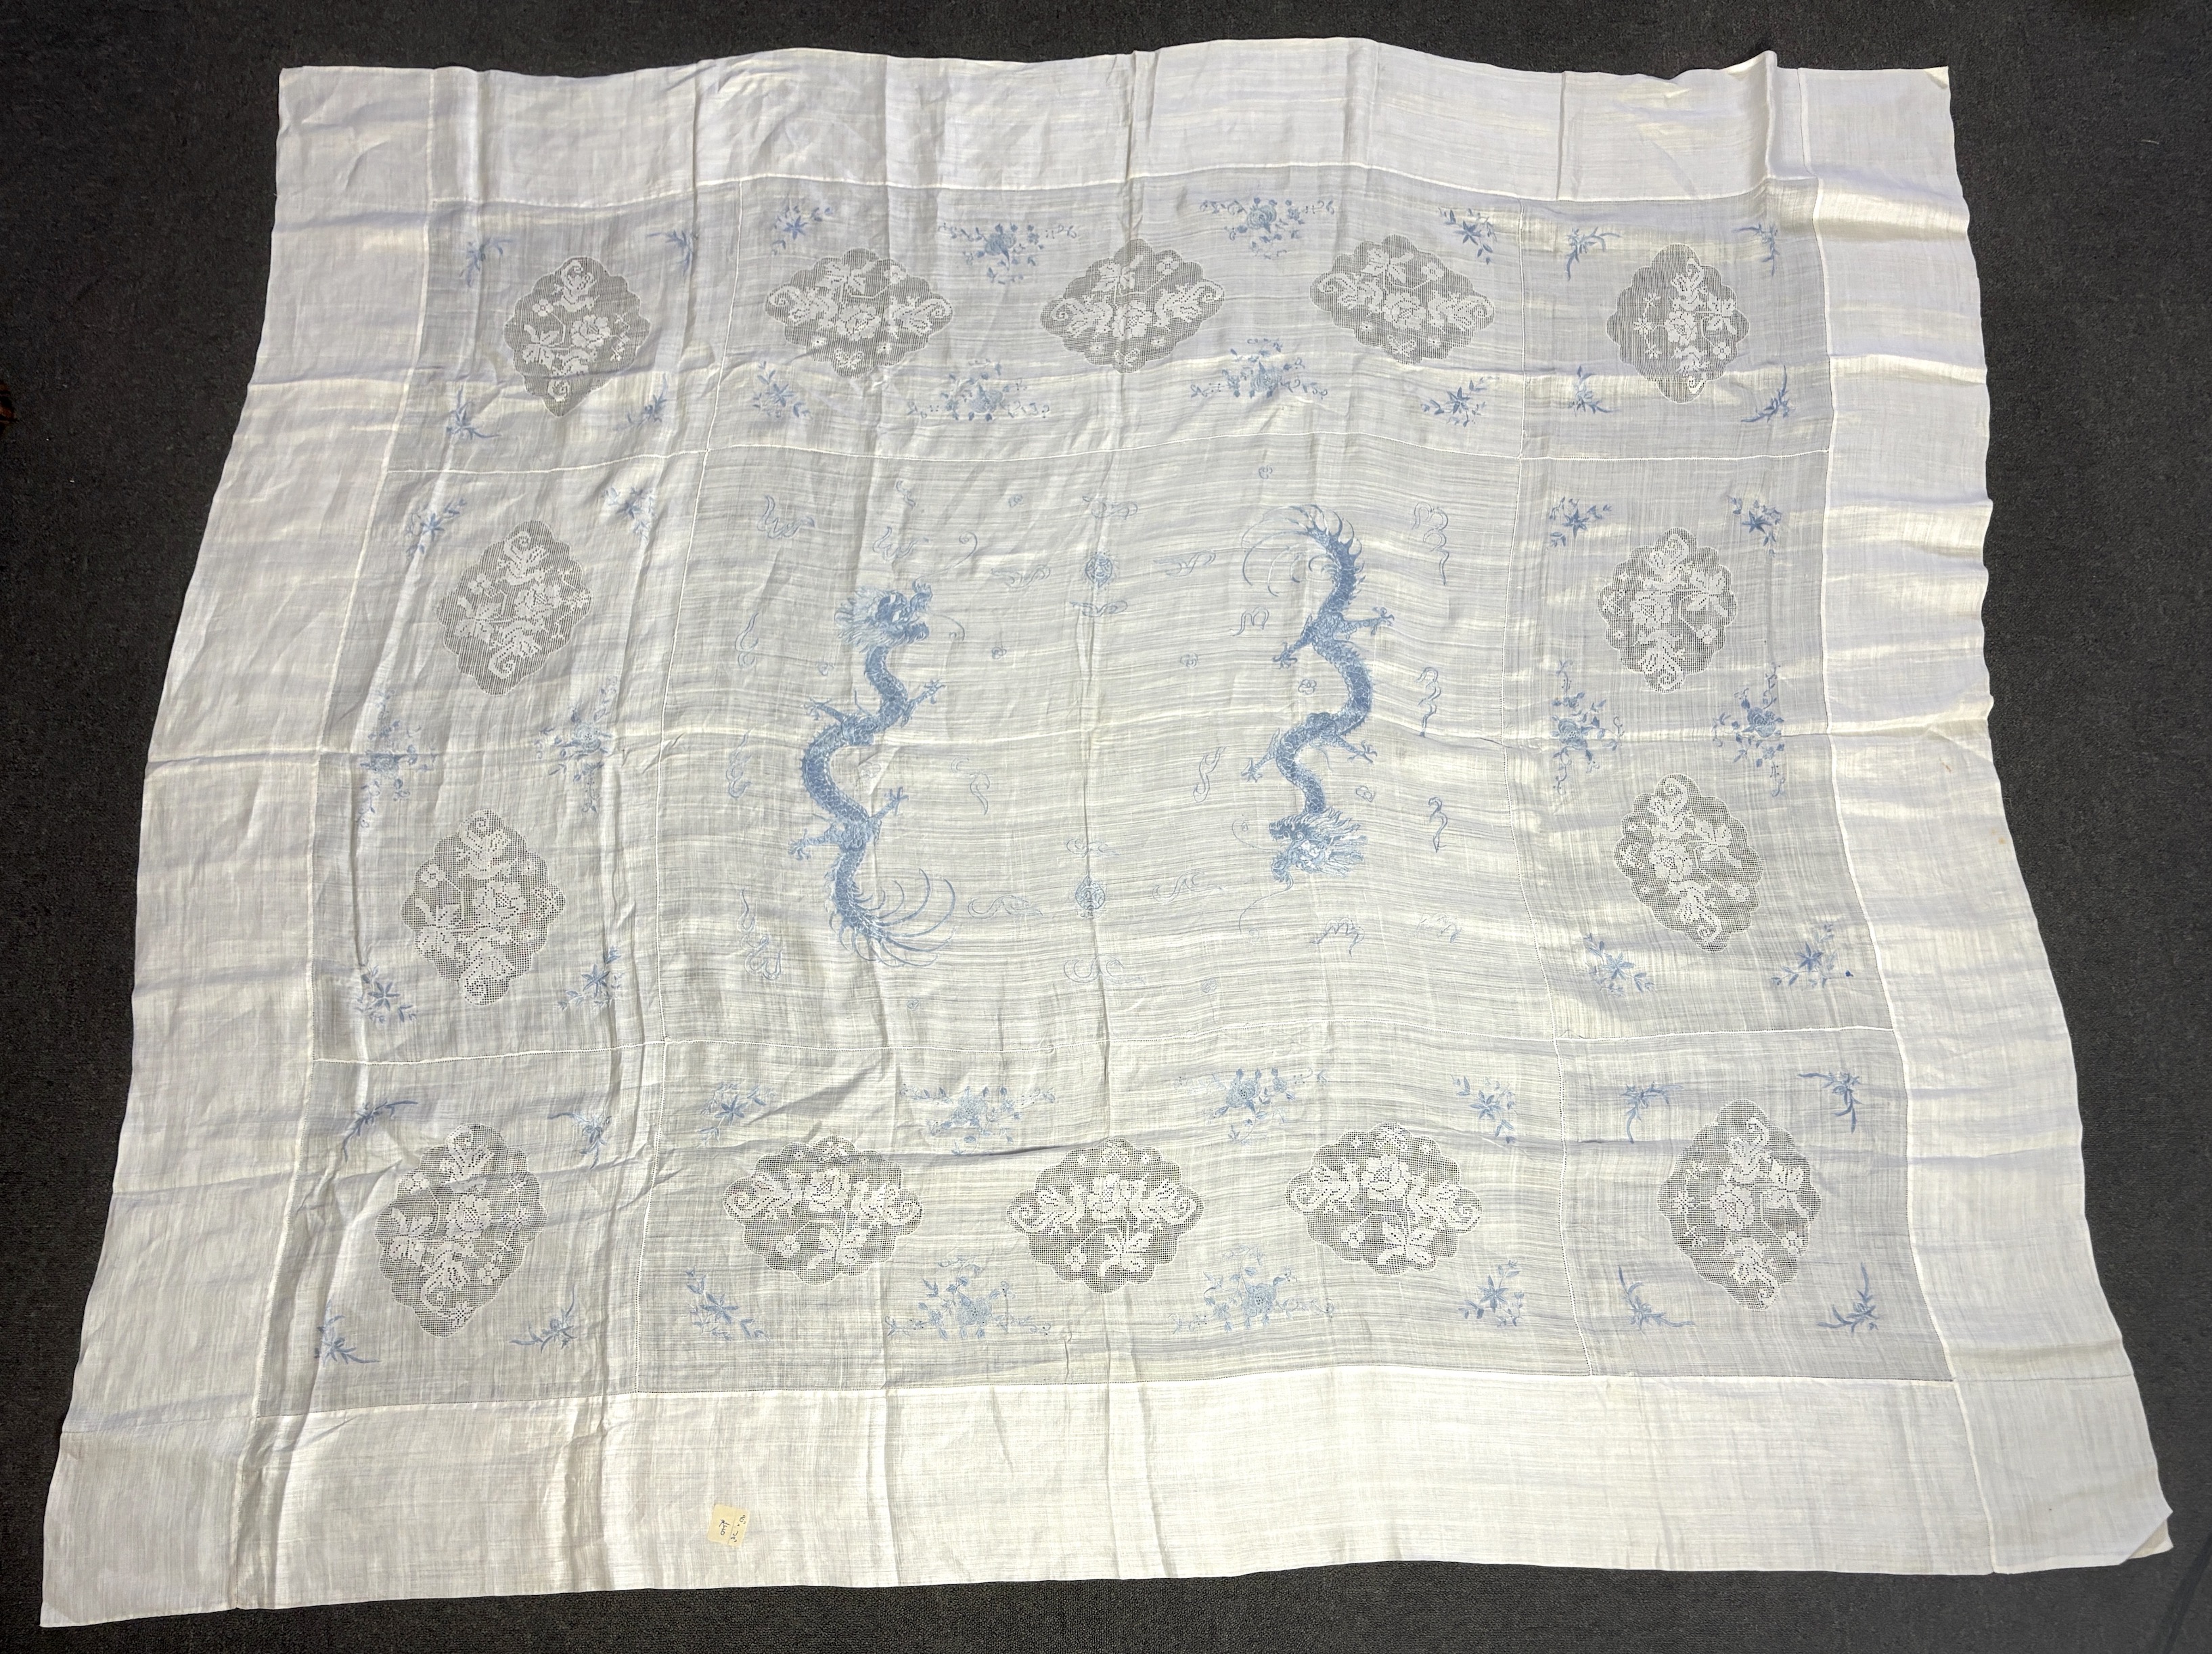 Chinese dragon and floral embroidered linen comprising two Chinese hand embroidered table cloths, both embroidered with blue dragons and flowers, together with a similar embroidered pillow case, a smaller cloth with whit